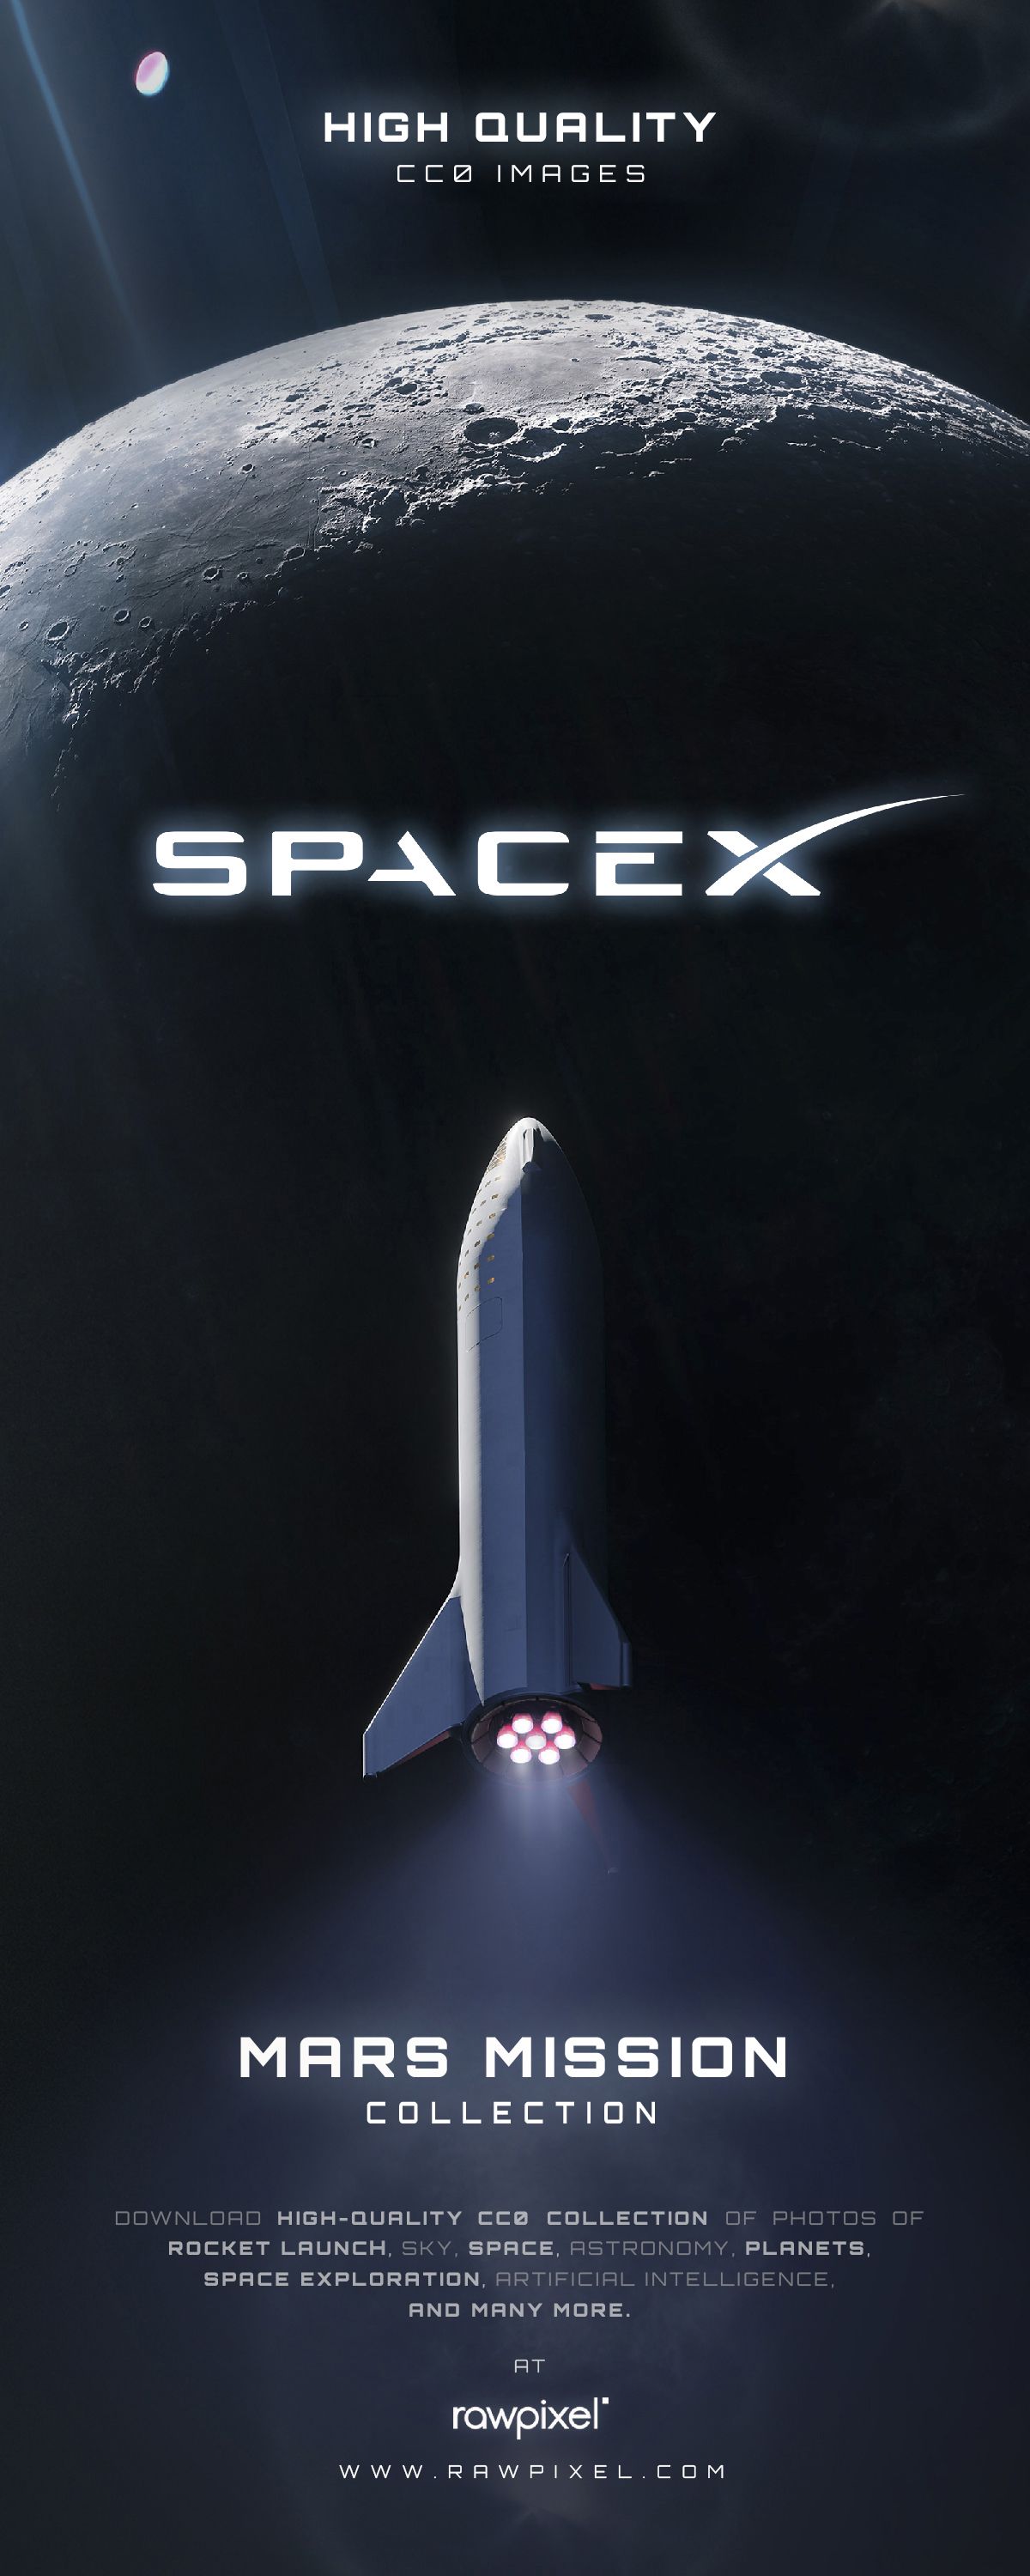 High Resolution Free SpaceX Launch And Exploration Photo Set. Space Exploration Illustration, Spacex, Space Photography